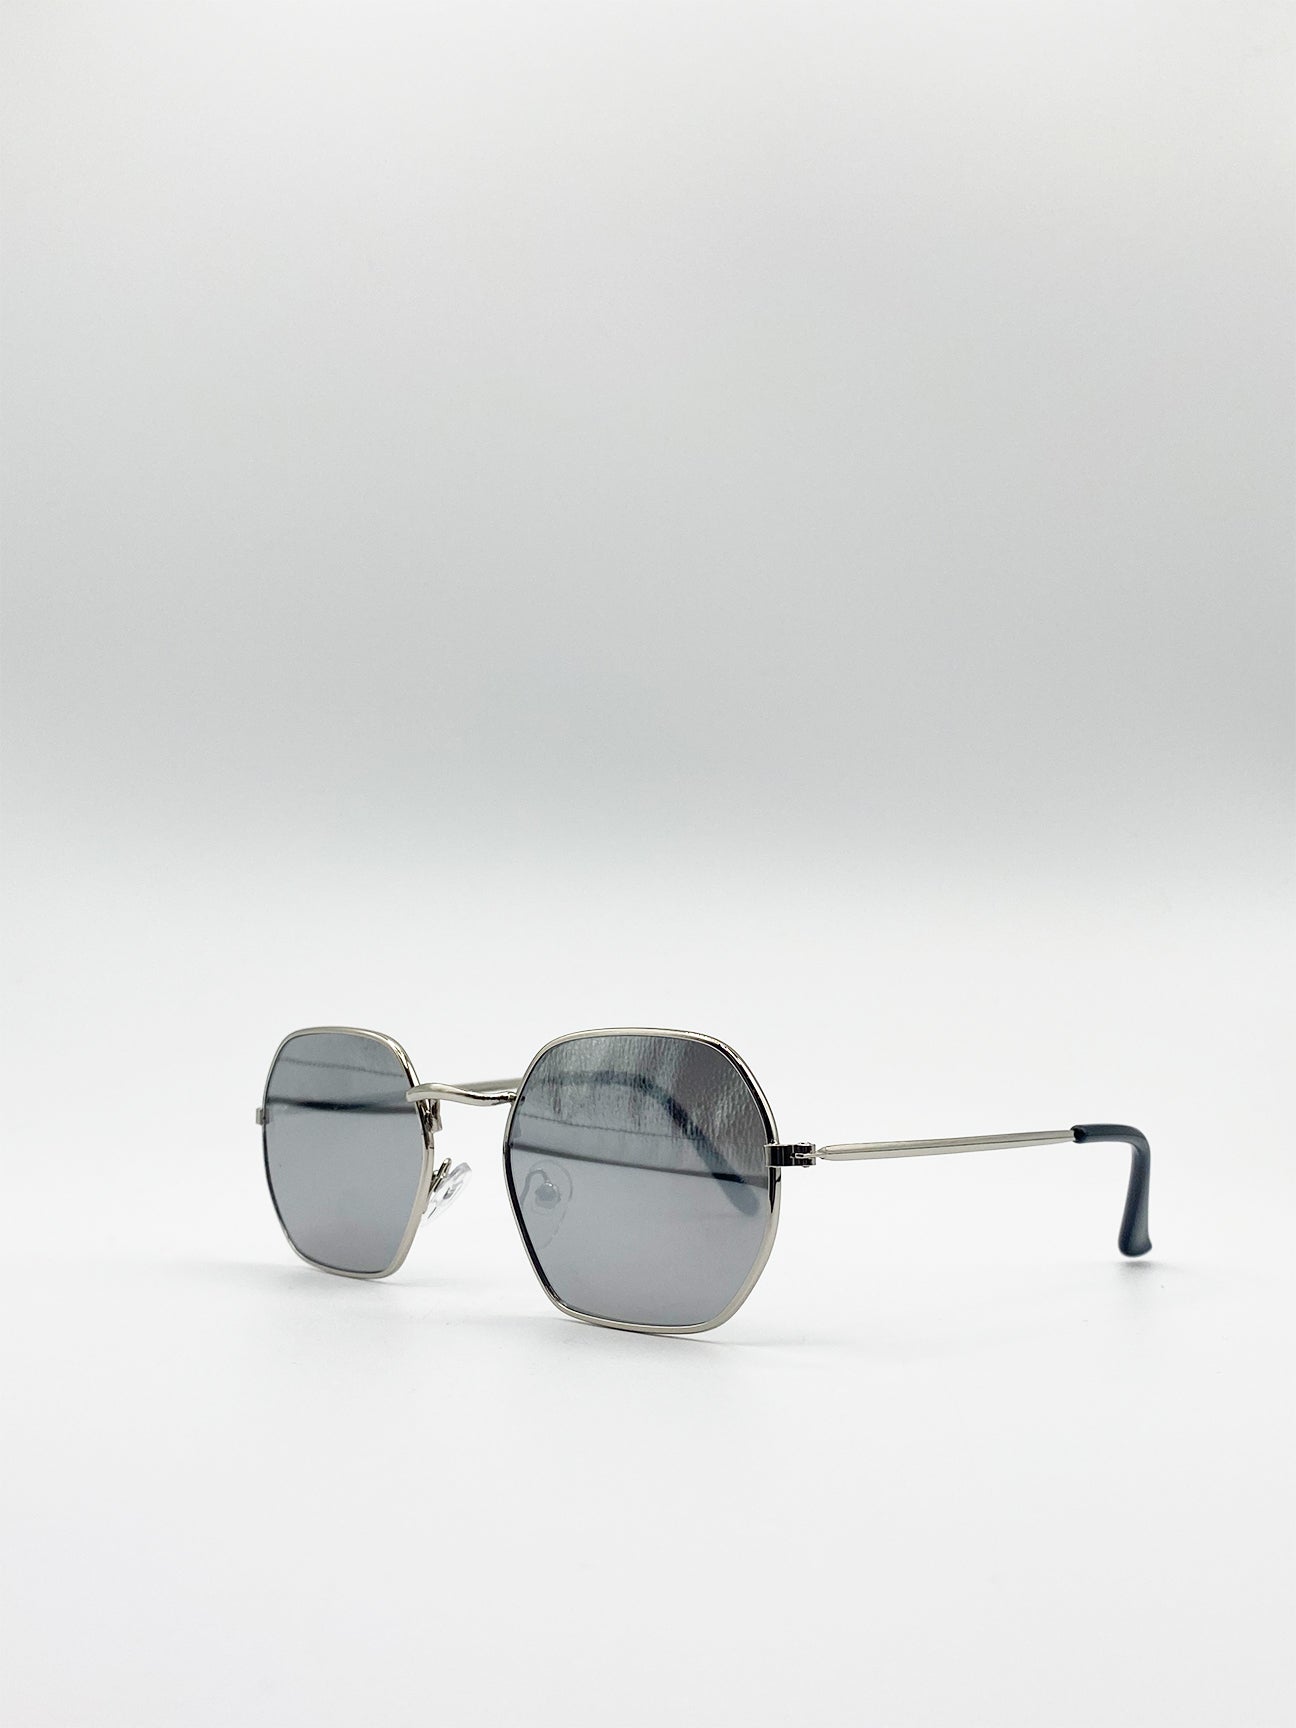 Hexagon Sunglasses Silver Frame with Silver Mirrored Lenses